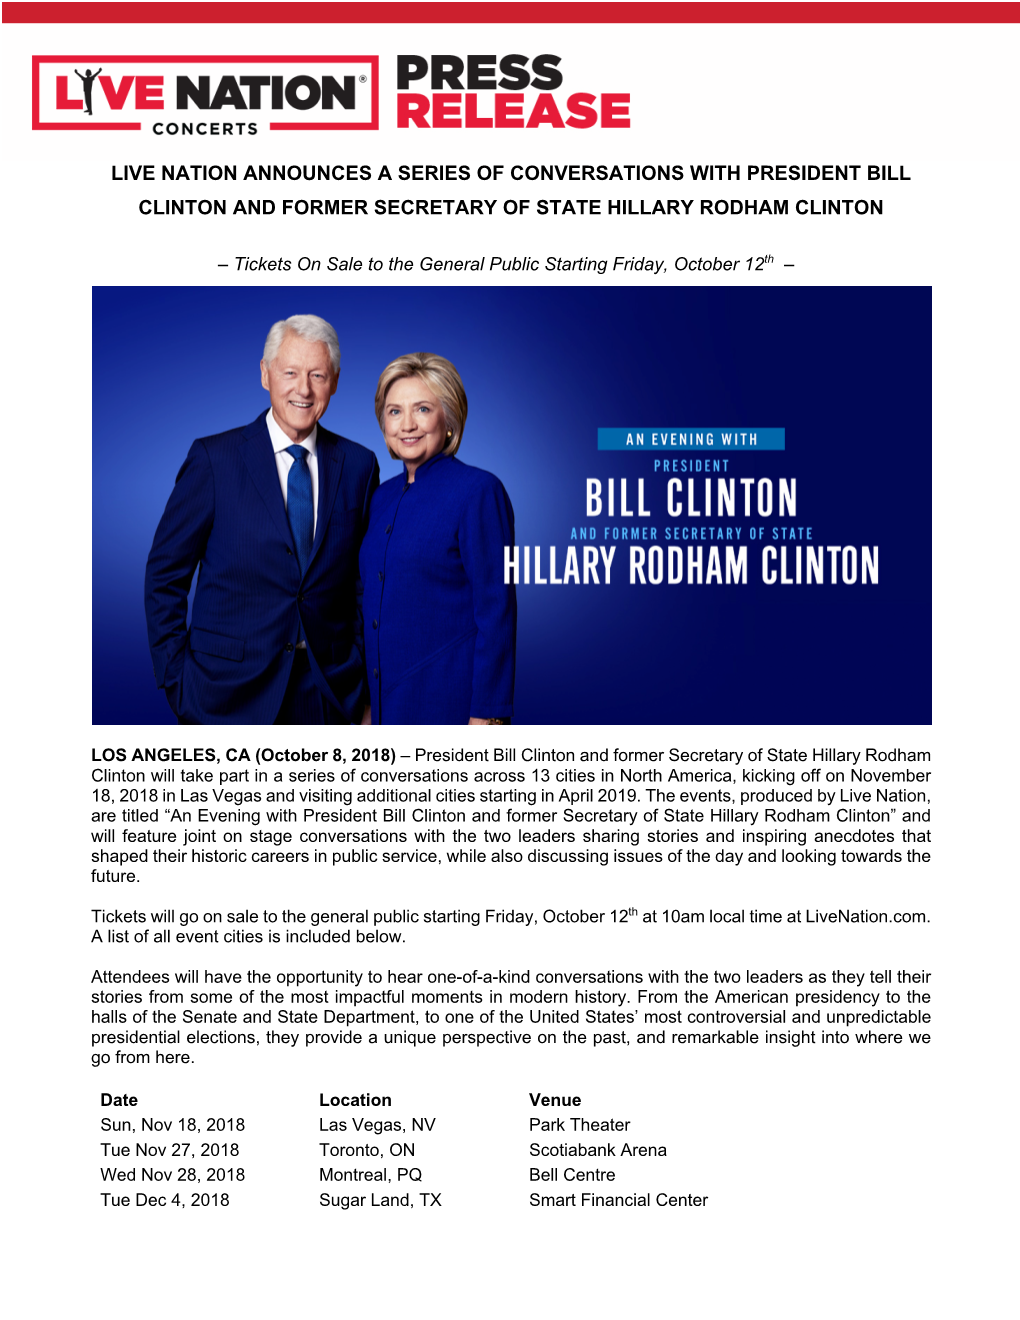 Live Nation Announces a Series of Conversations with President Bill Clinton and Former Secretary of State Hillary Rodham Clinton